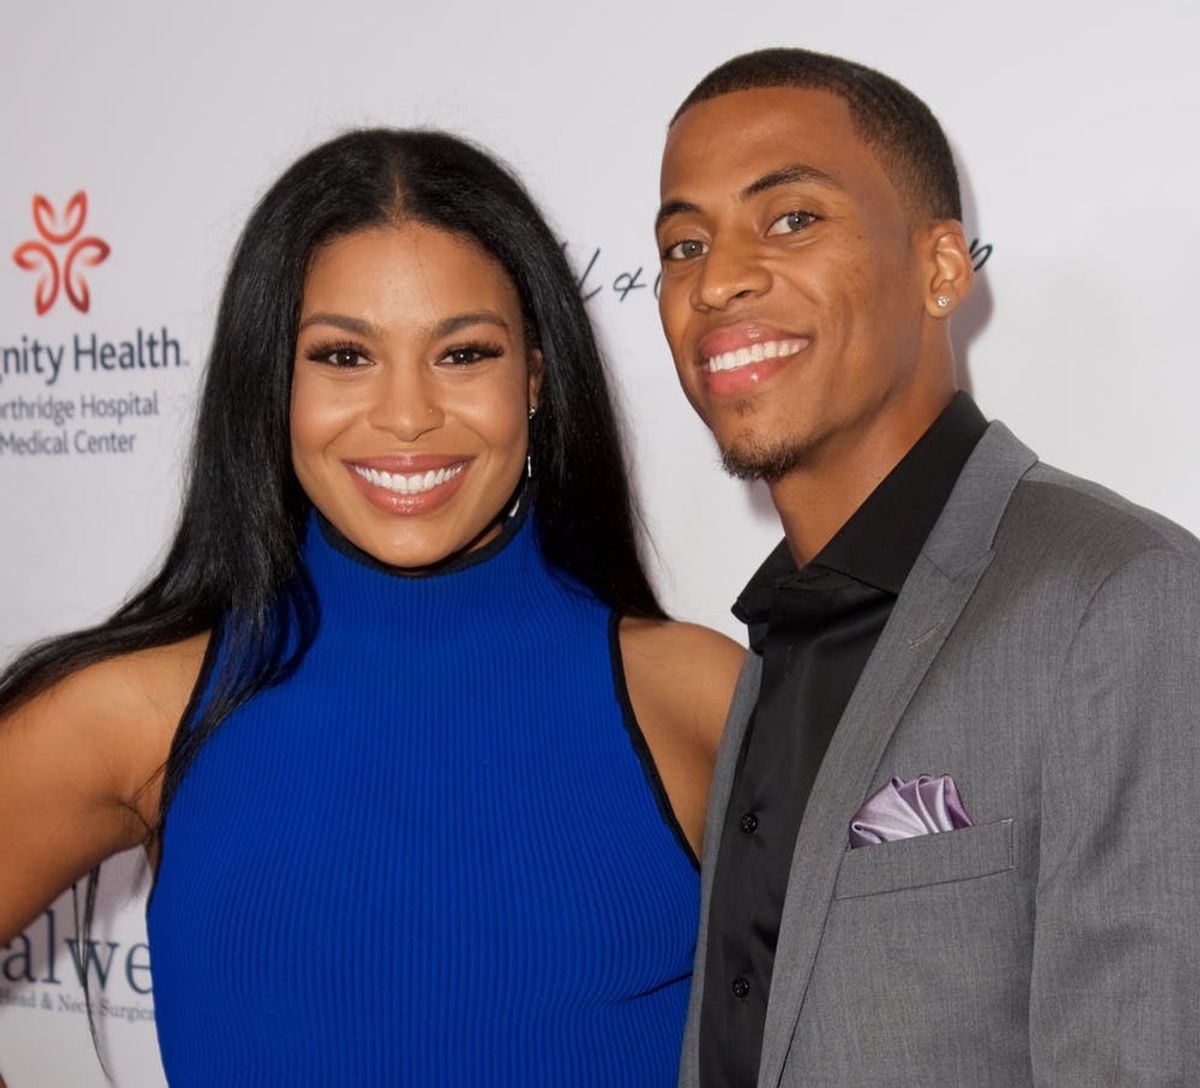 “American Idol” Star Jordin Sparks Reveals She’s Married and Pregnant!